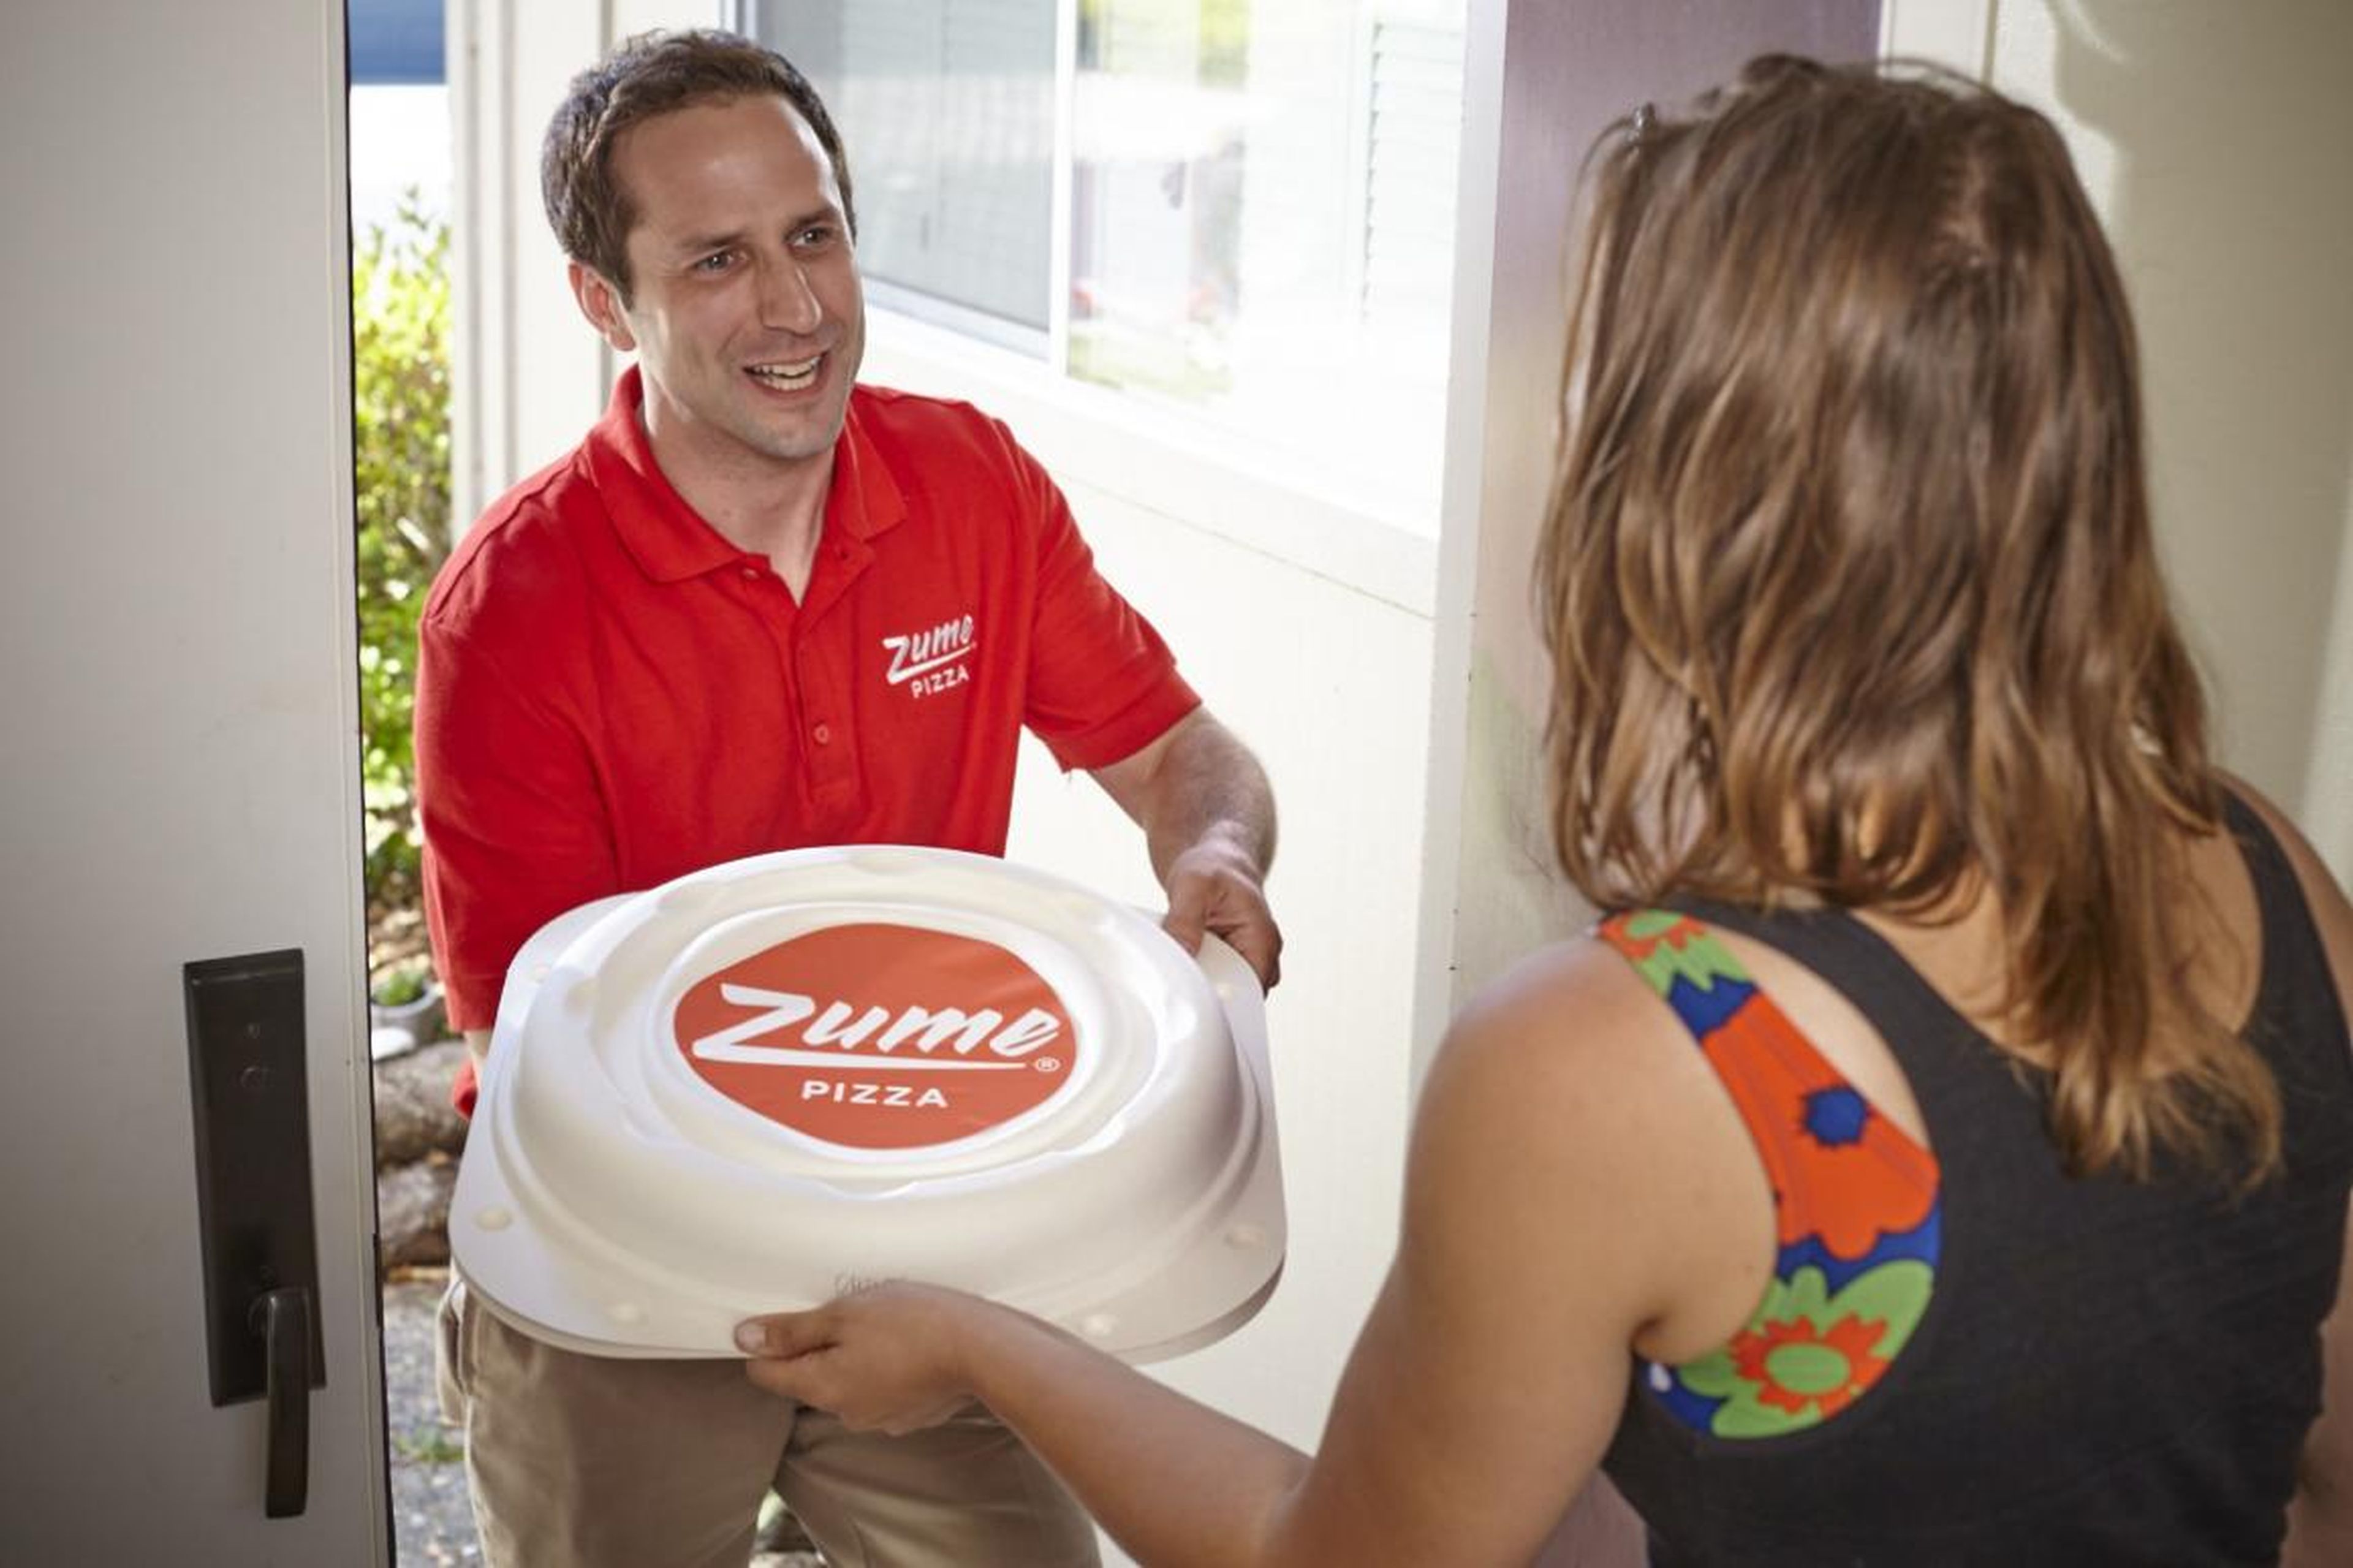 Zume has collected so much customer data since launch, it can "predict what pizza you want before you even order it," Collins said.